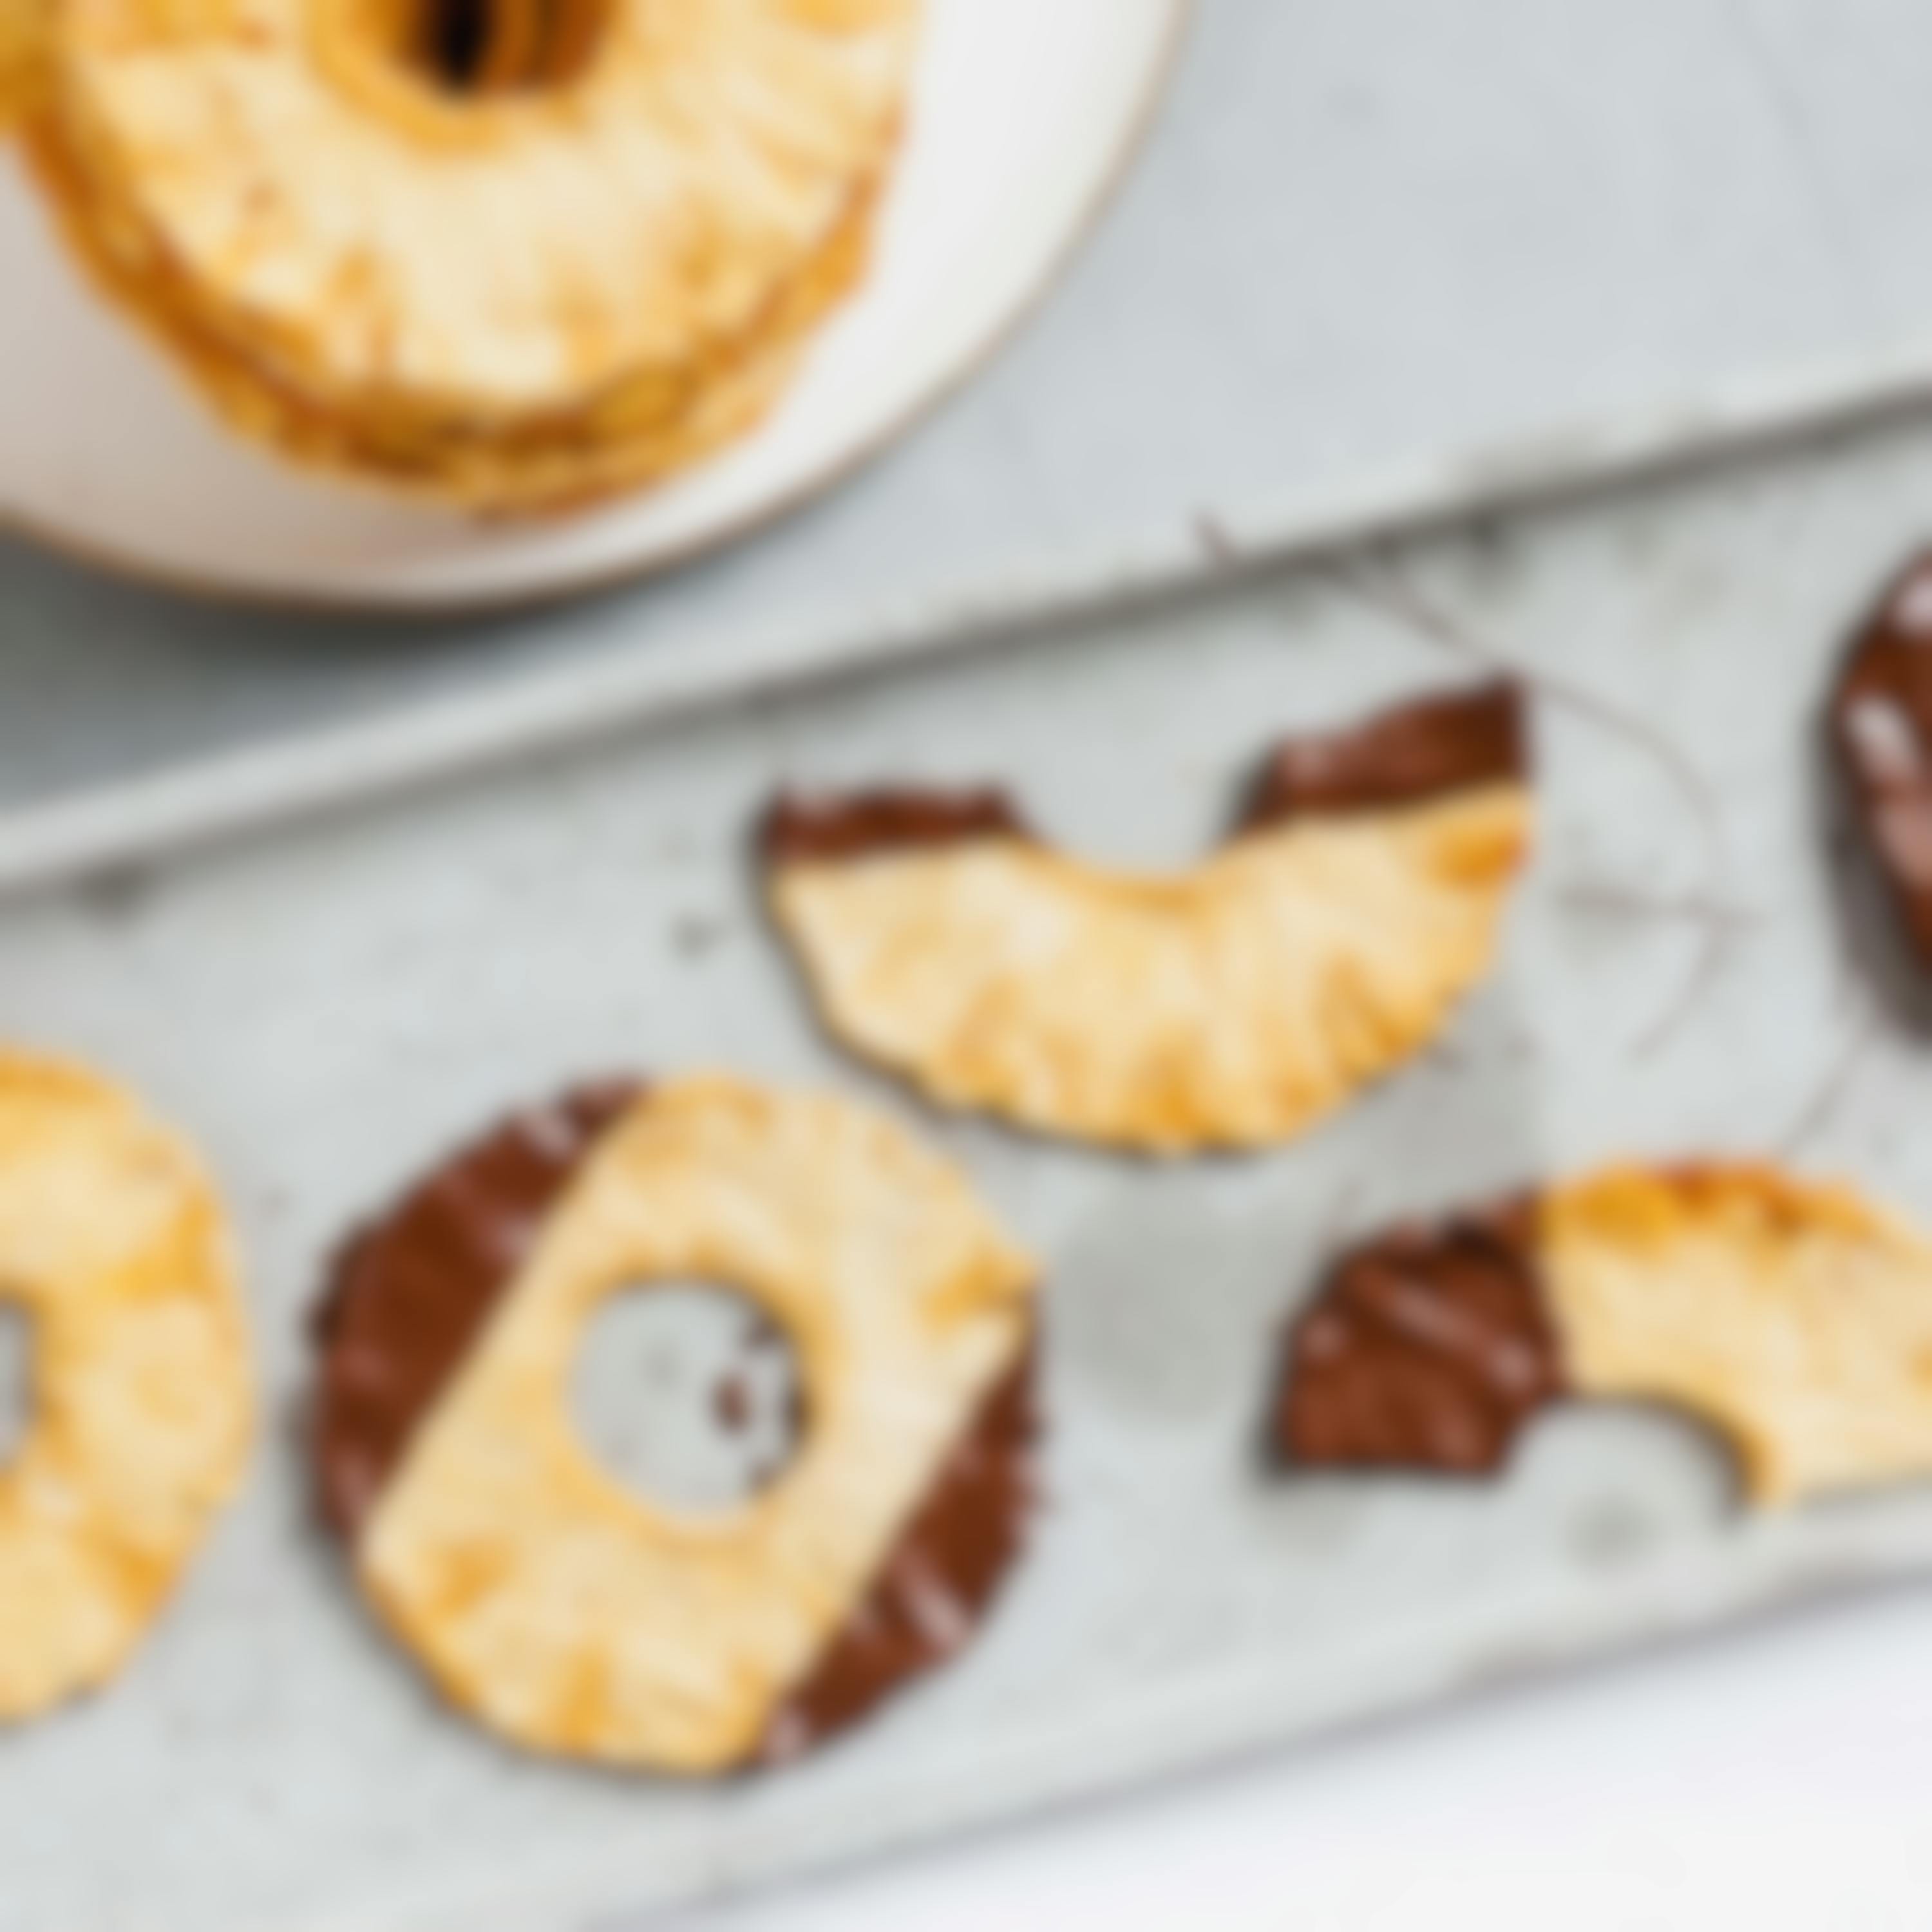 Pineapple rings with chocolate